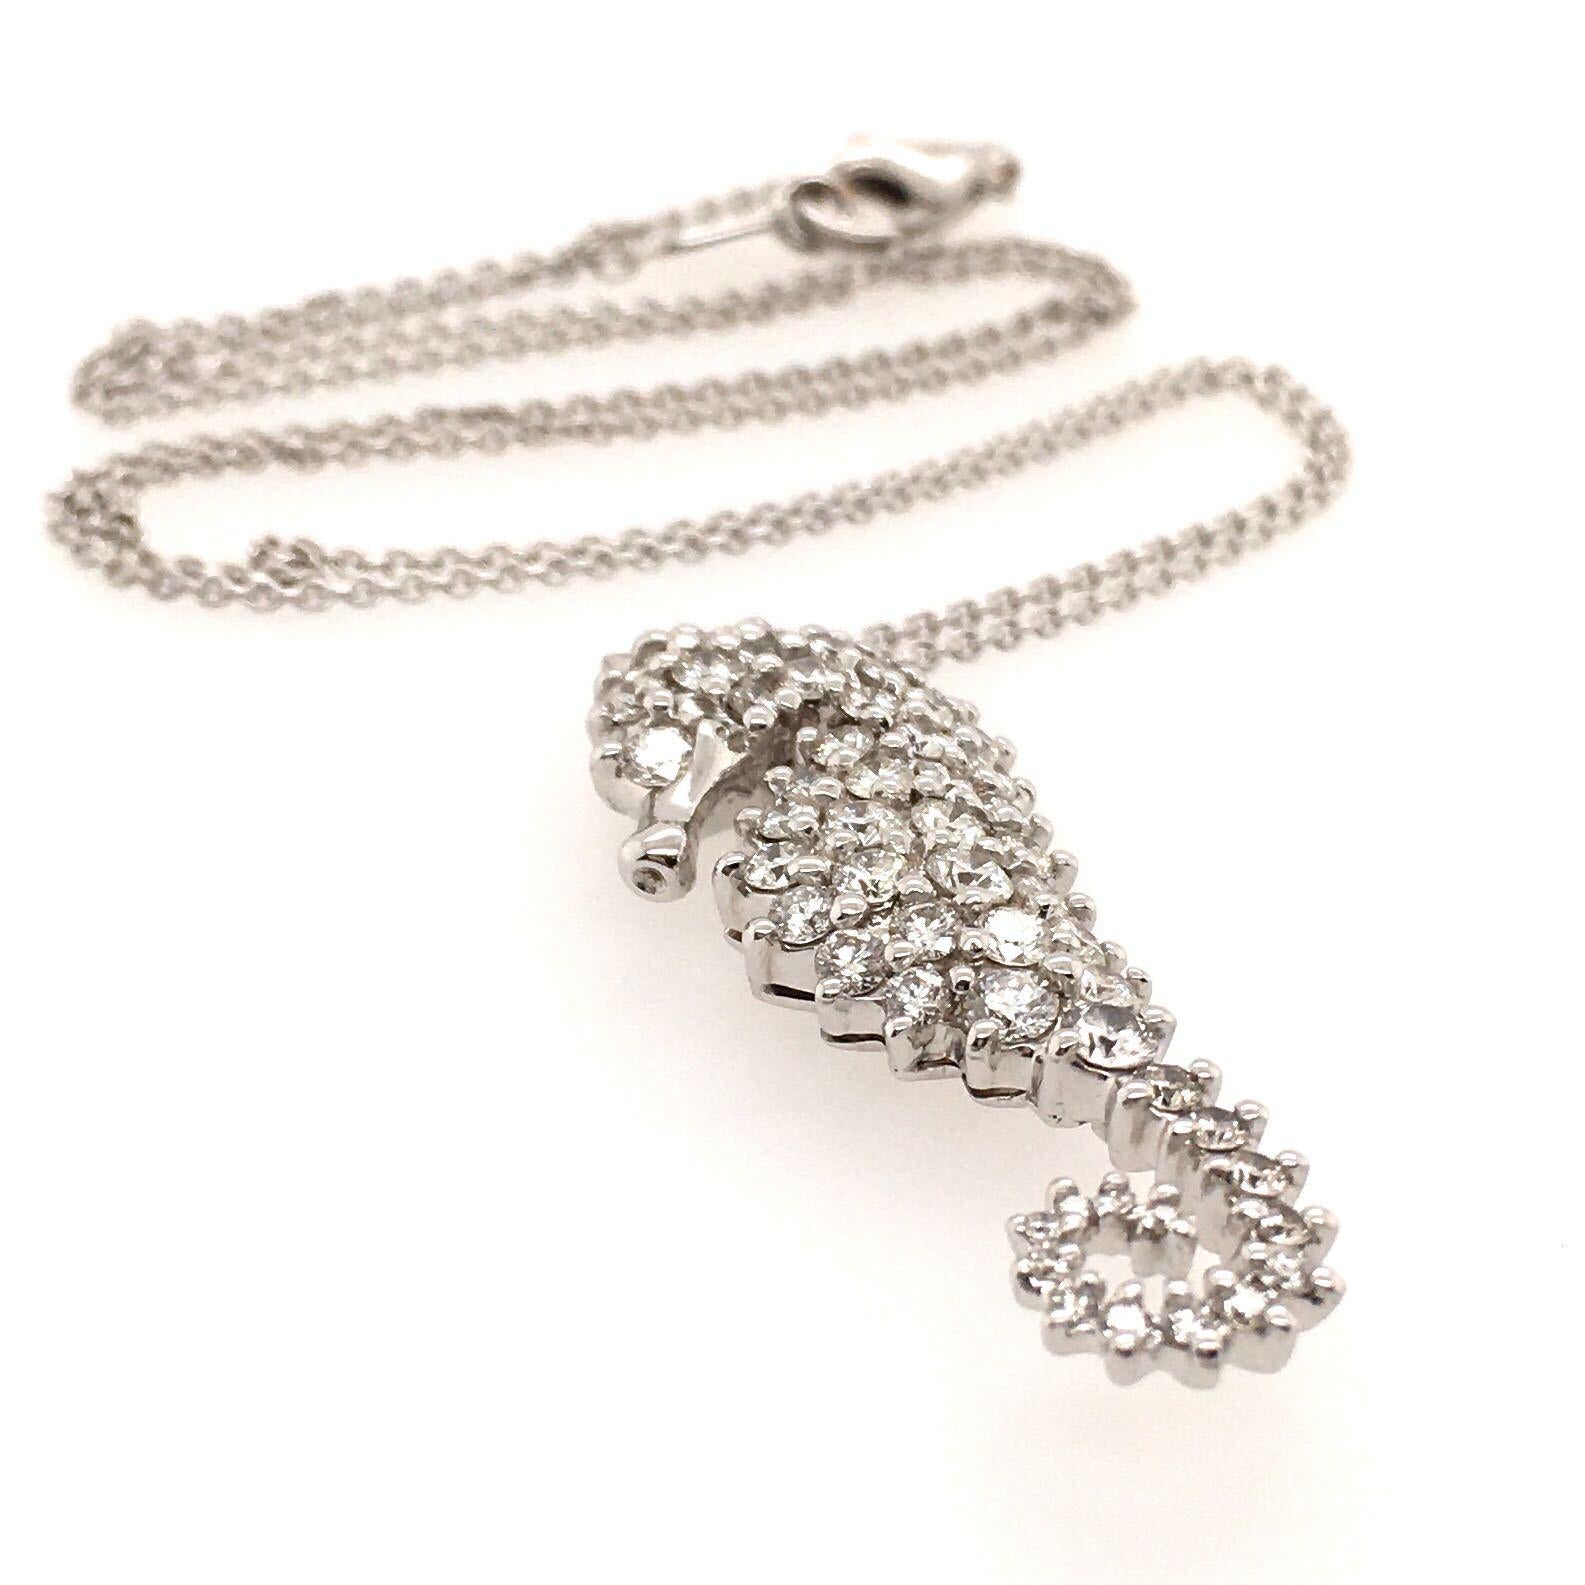 An 18 karat white gold and diamond sea horse pendant necklace. Suspending a pave set diamond sea horse, set with fifty (50) diamonds, weighing approximately 1.70 carat, from a fine link chain. Pendant length is approximately 1 1/4 inches, chain